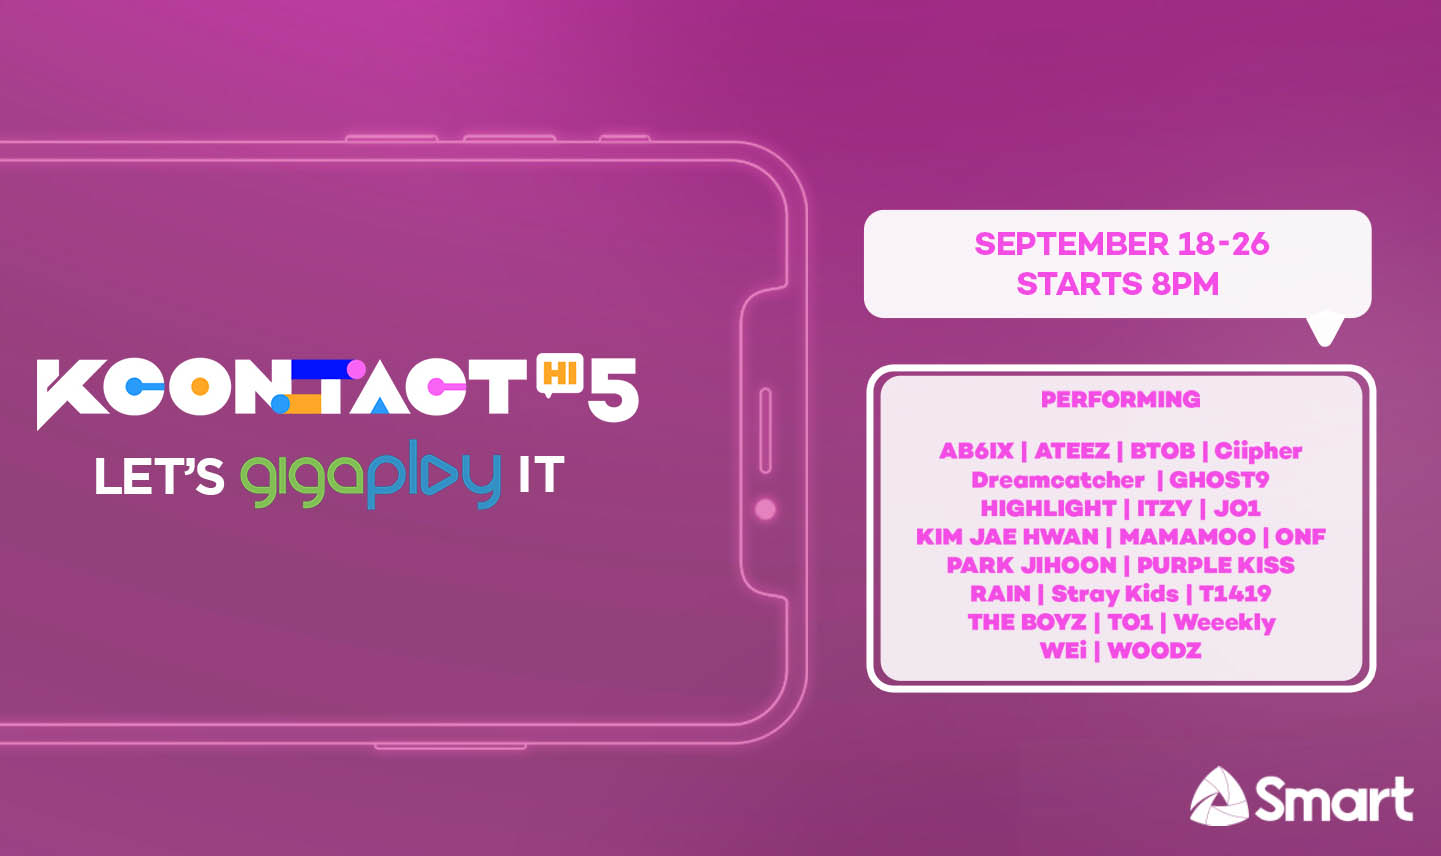 Watch live performances by ITZY, MAMAMOO, Stray Kids, ONF,  PARK JIHOON, RAIN, THE BOYZ for free exclusively on Smart’s GigaPlay App